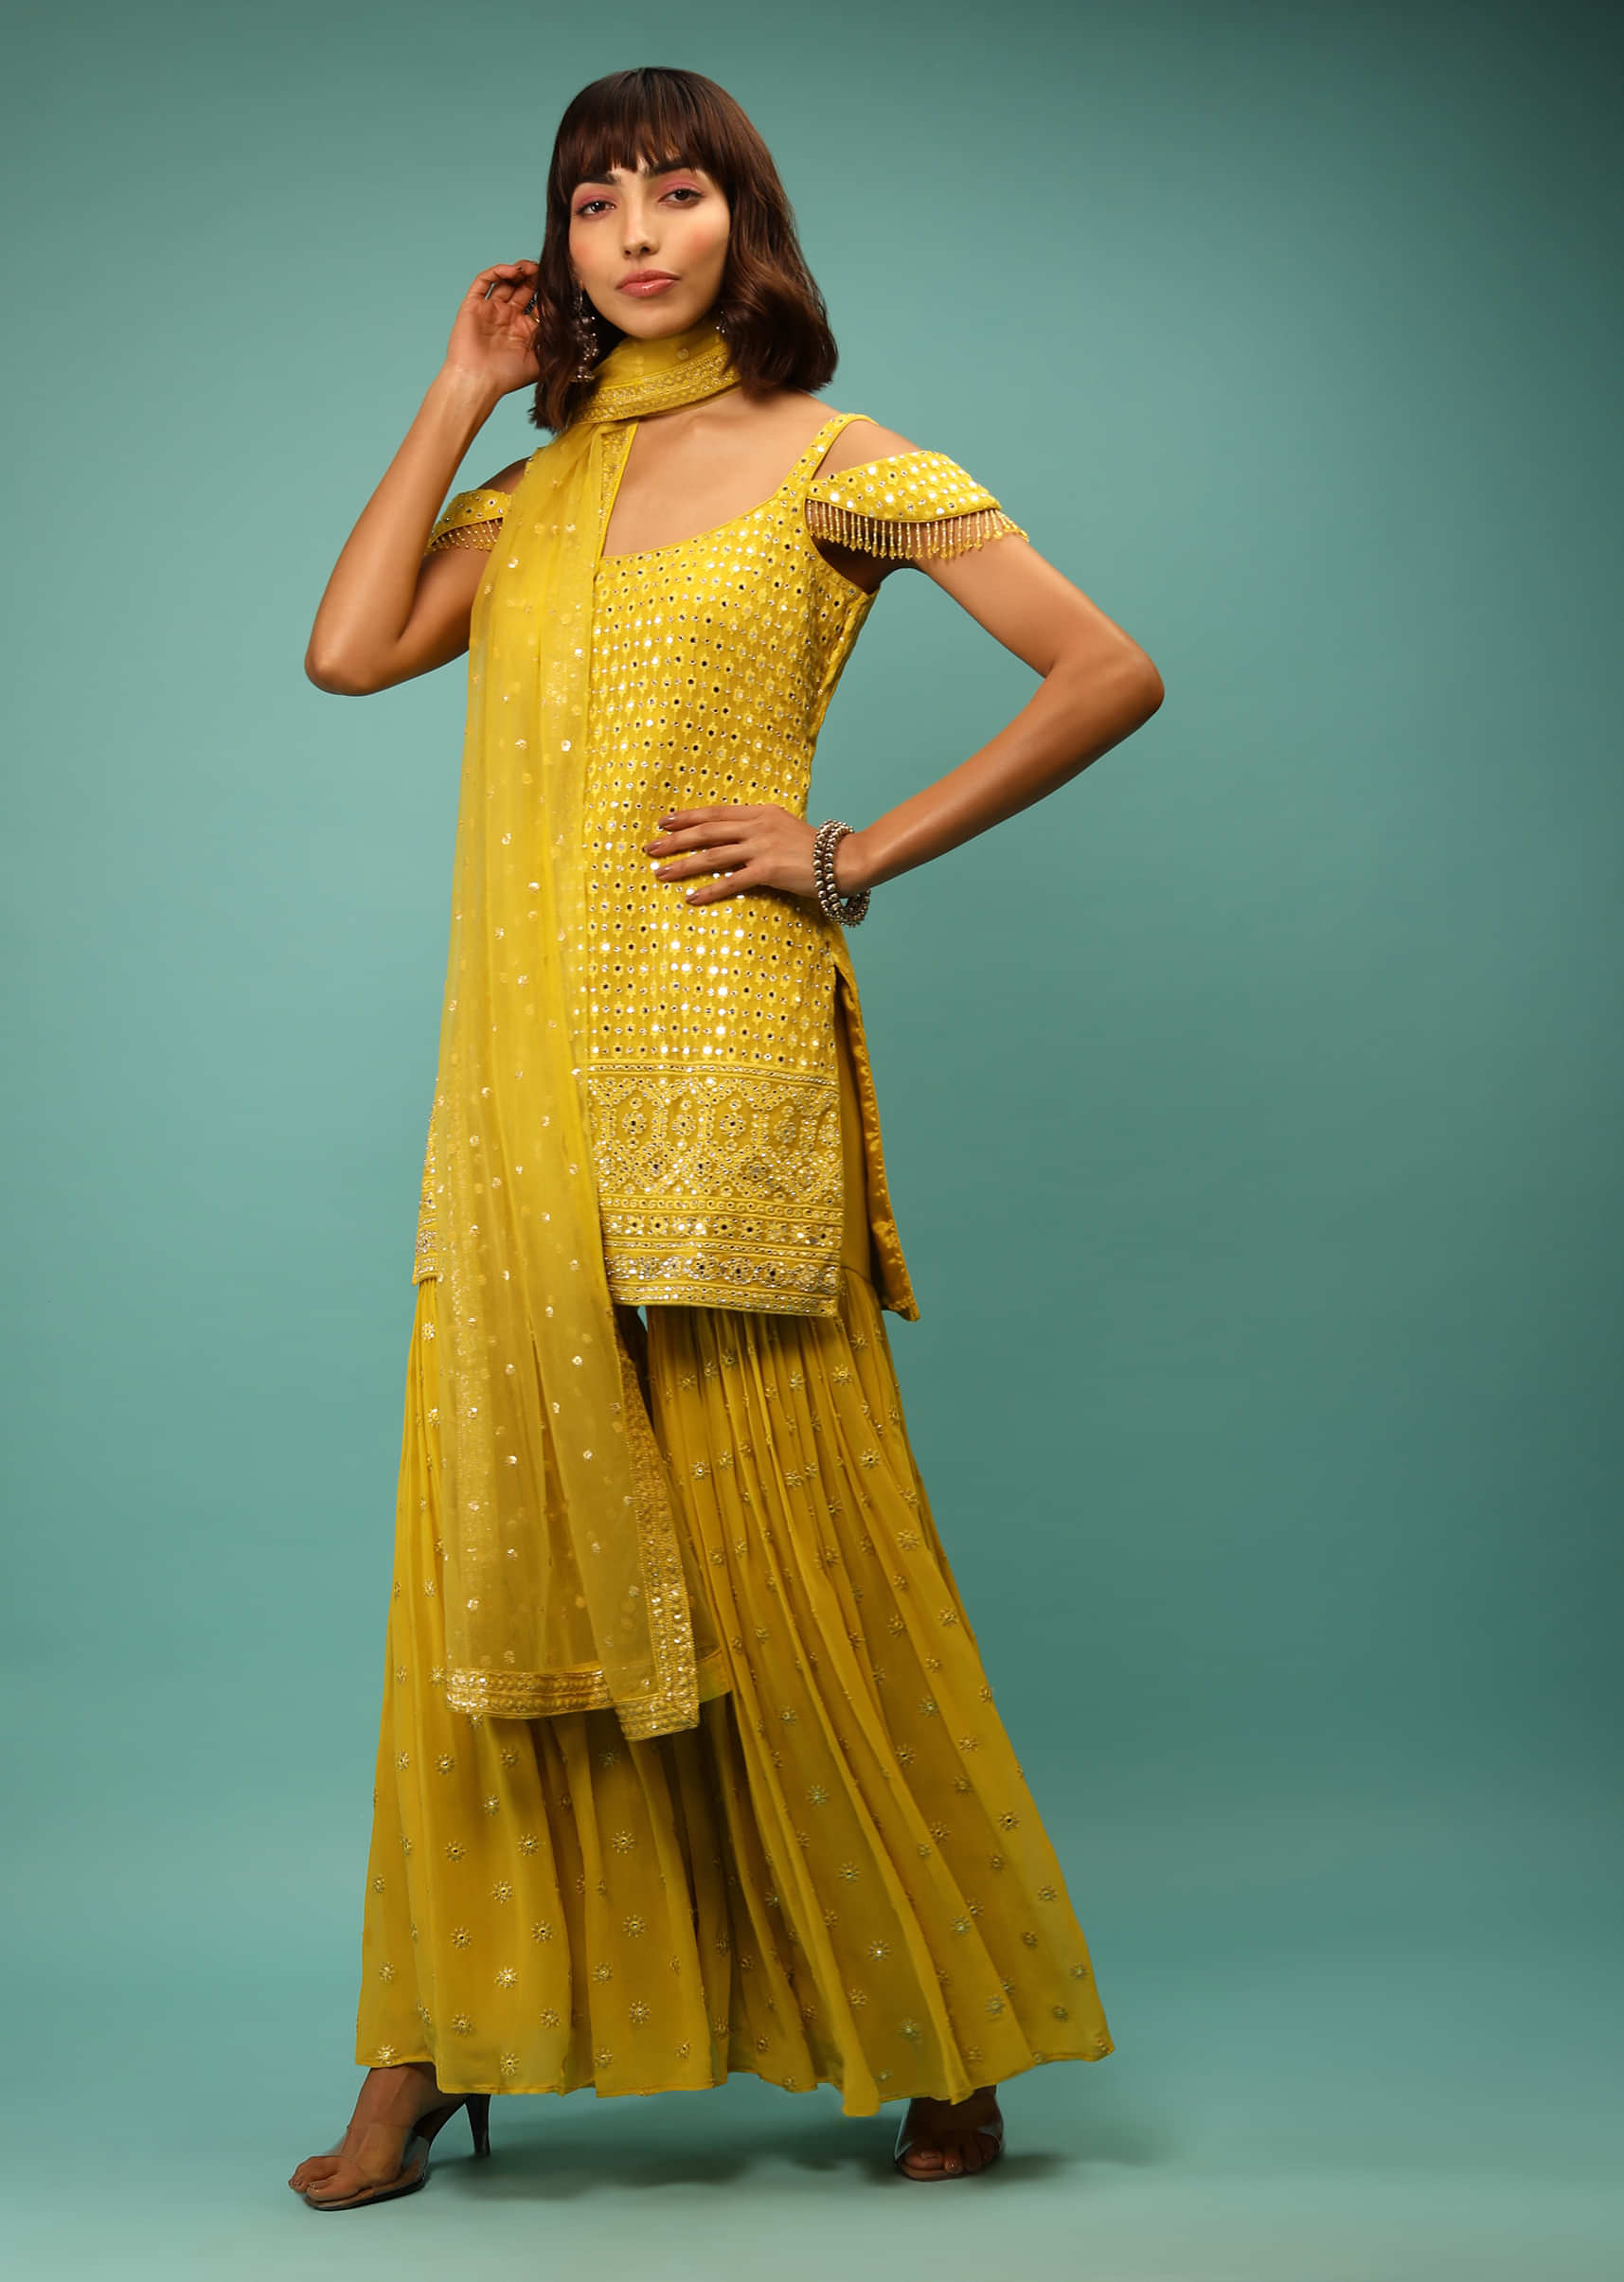 Sulphur Yellow Sharara Suti In Georette With Mirror Work And Fringed Cold Shoulder Sleeves 